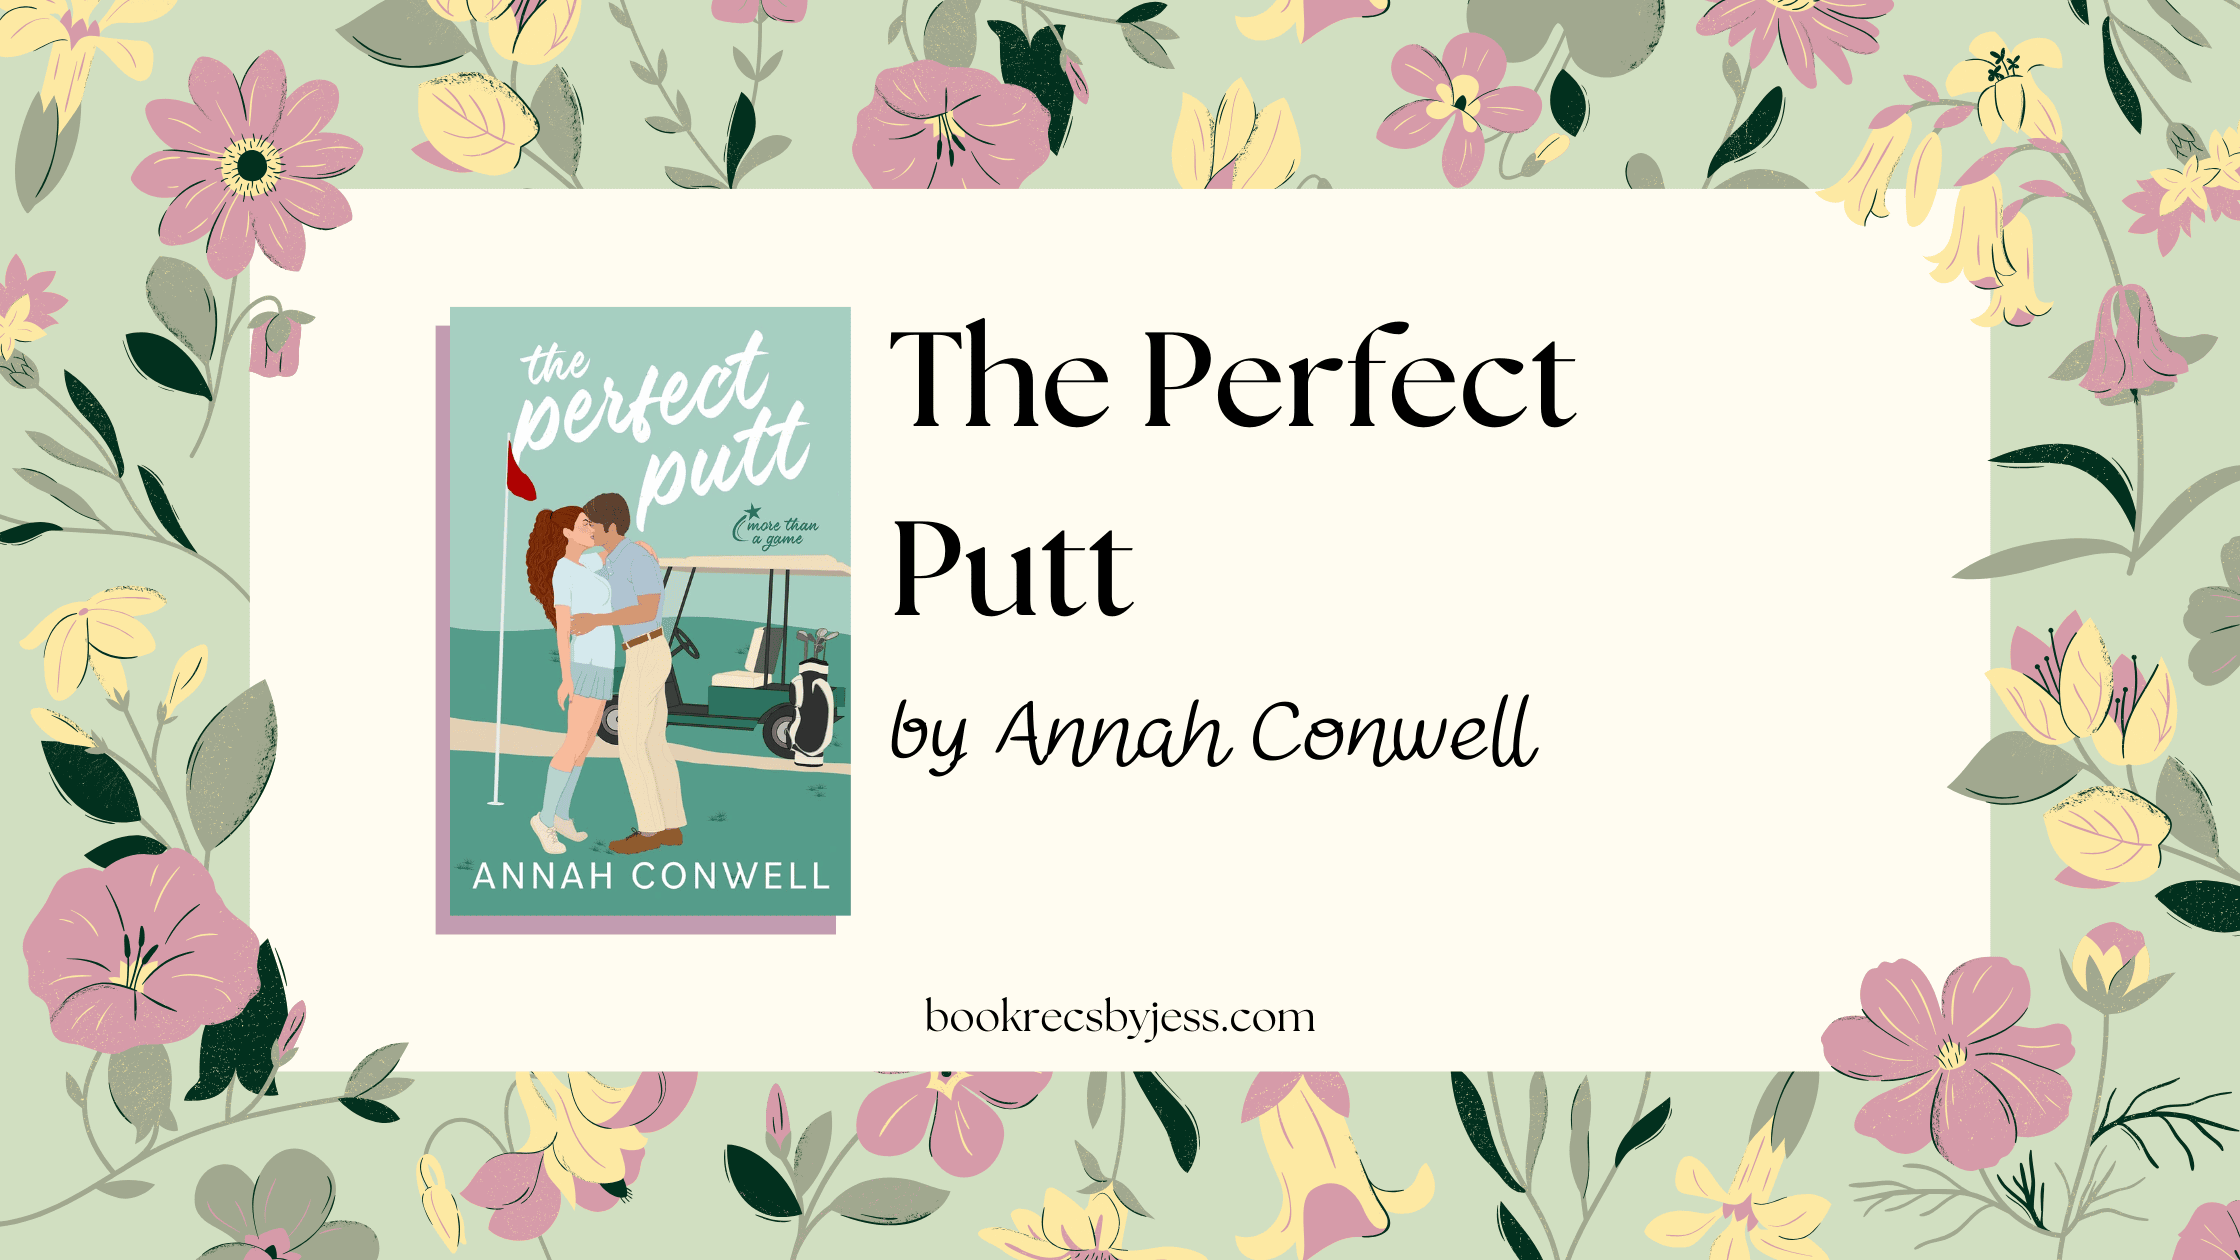 The Perfect Putt by Annah Conwell Book Review